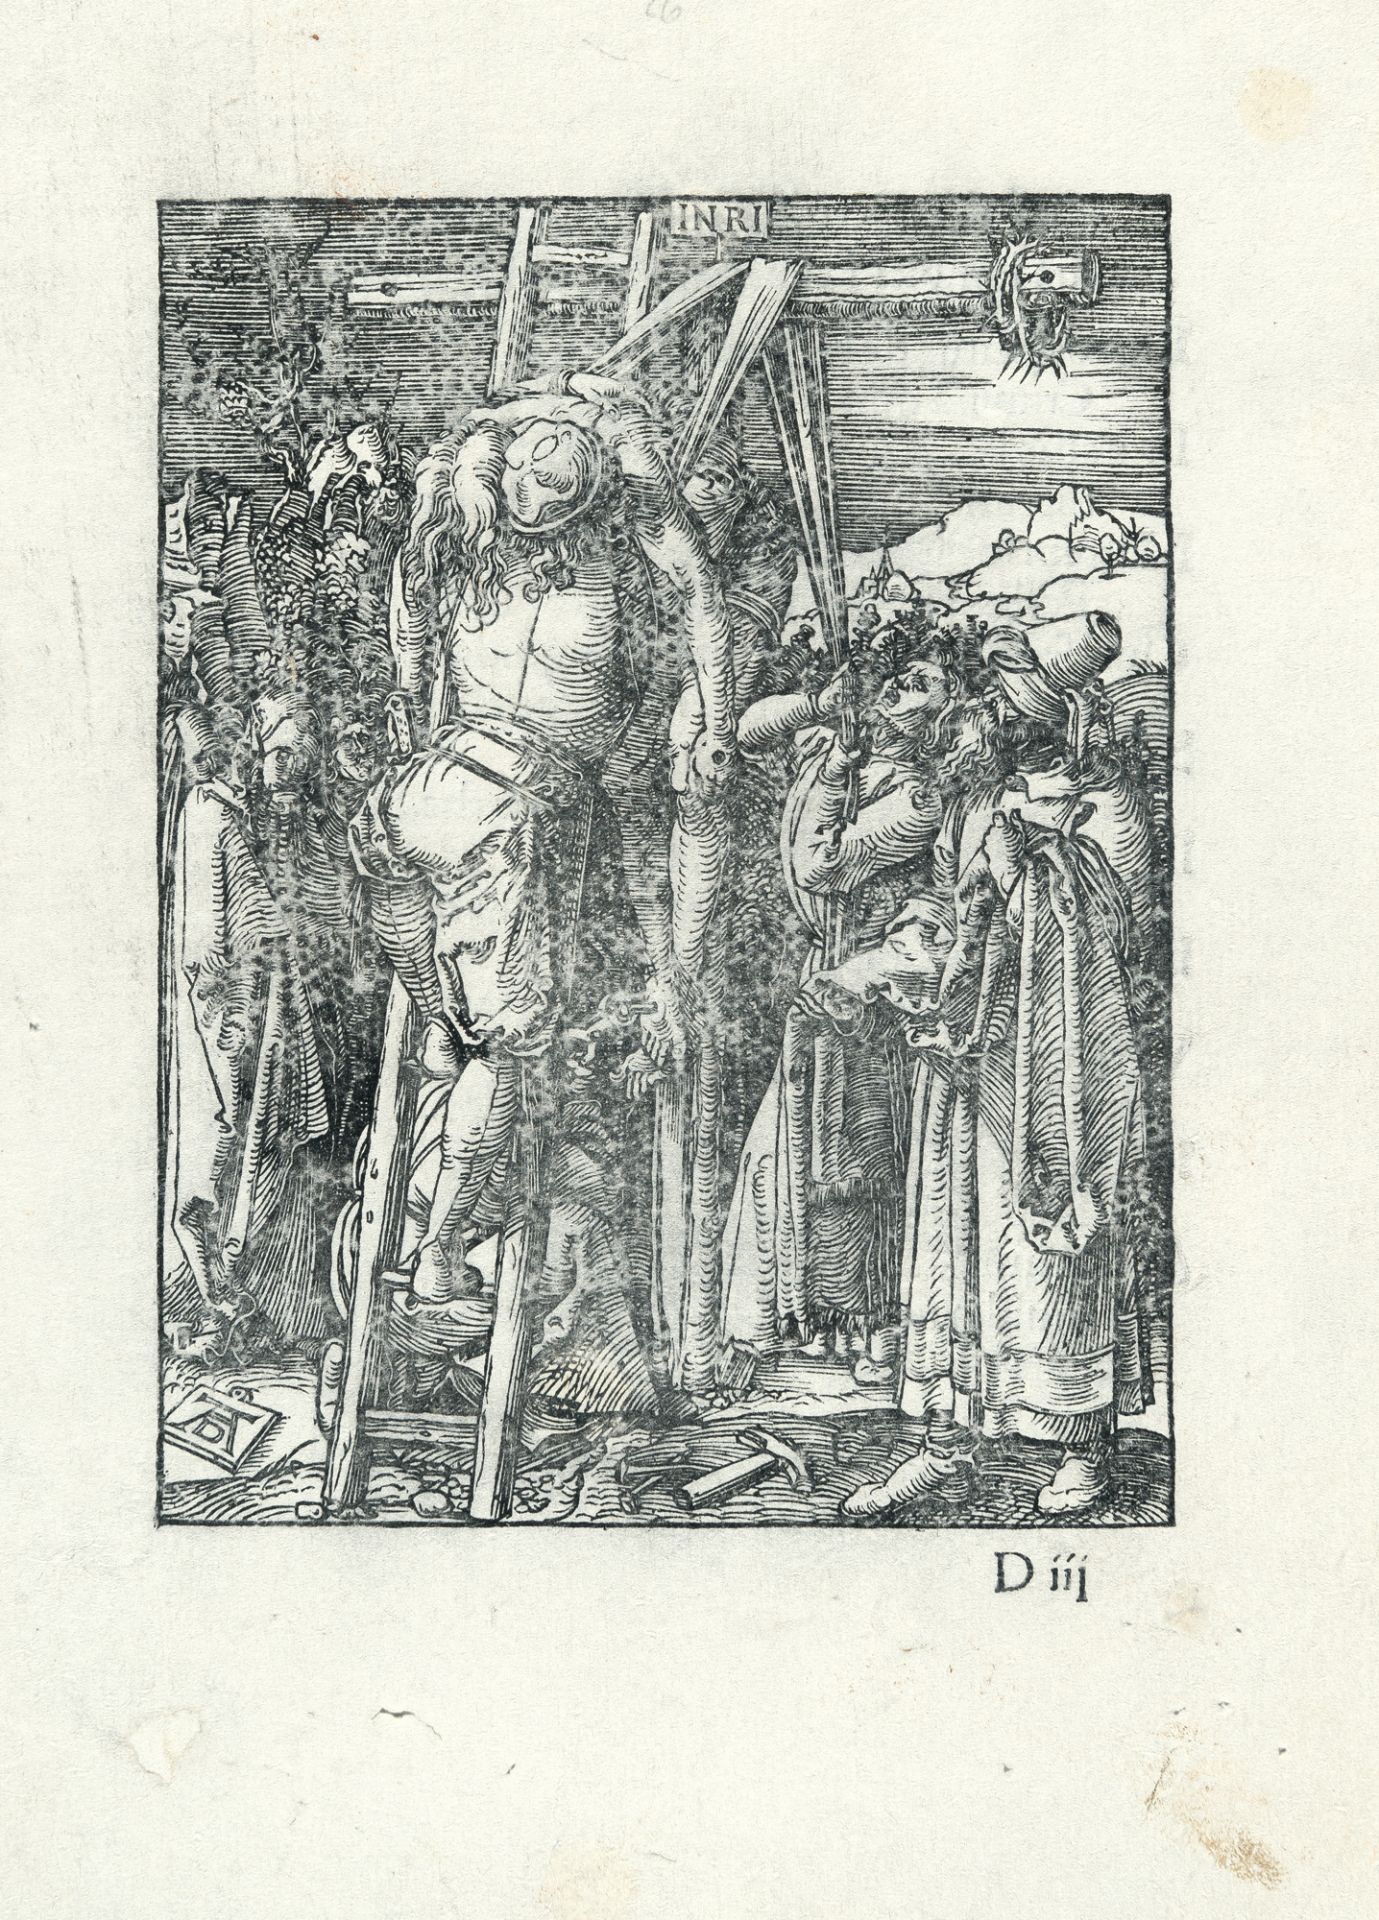 Albrecht Dürer (1471 - Nürnberg - 1528) – The Descent from the Cross (From "The Small Passion")